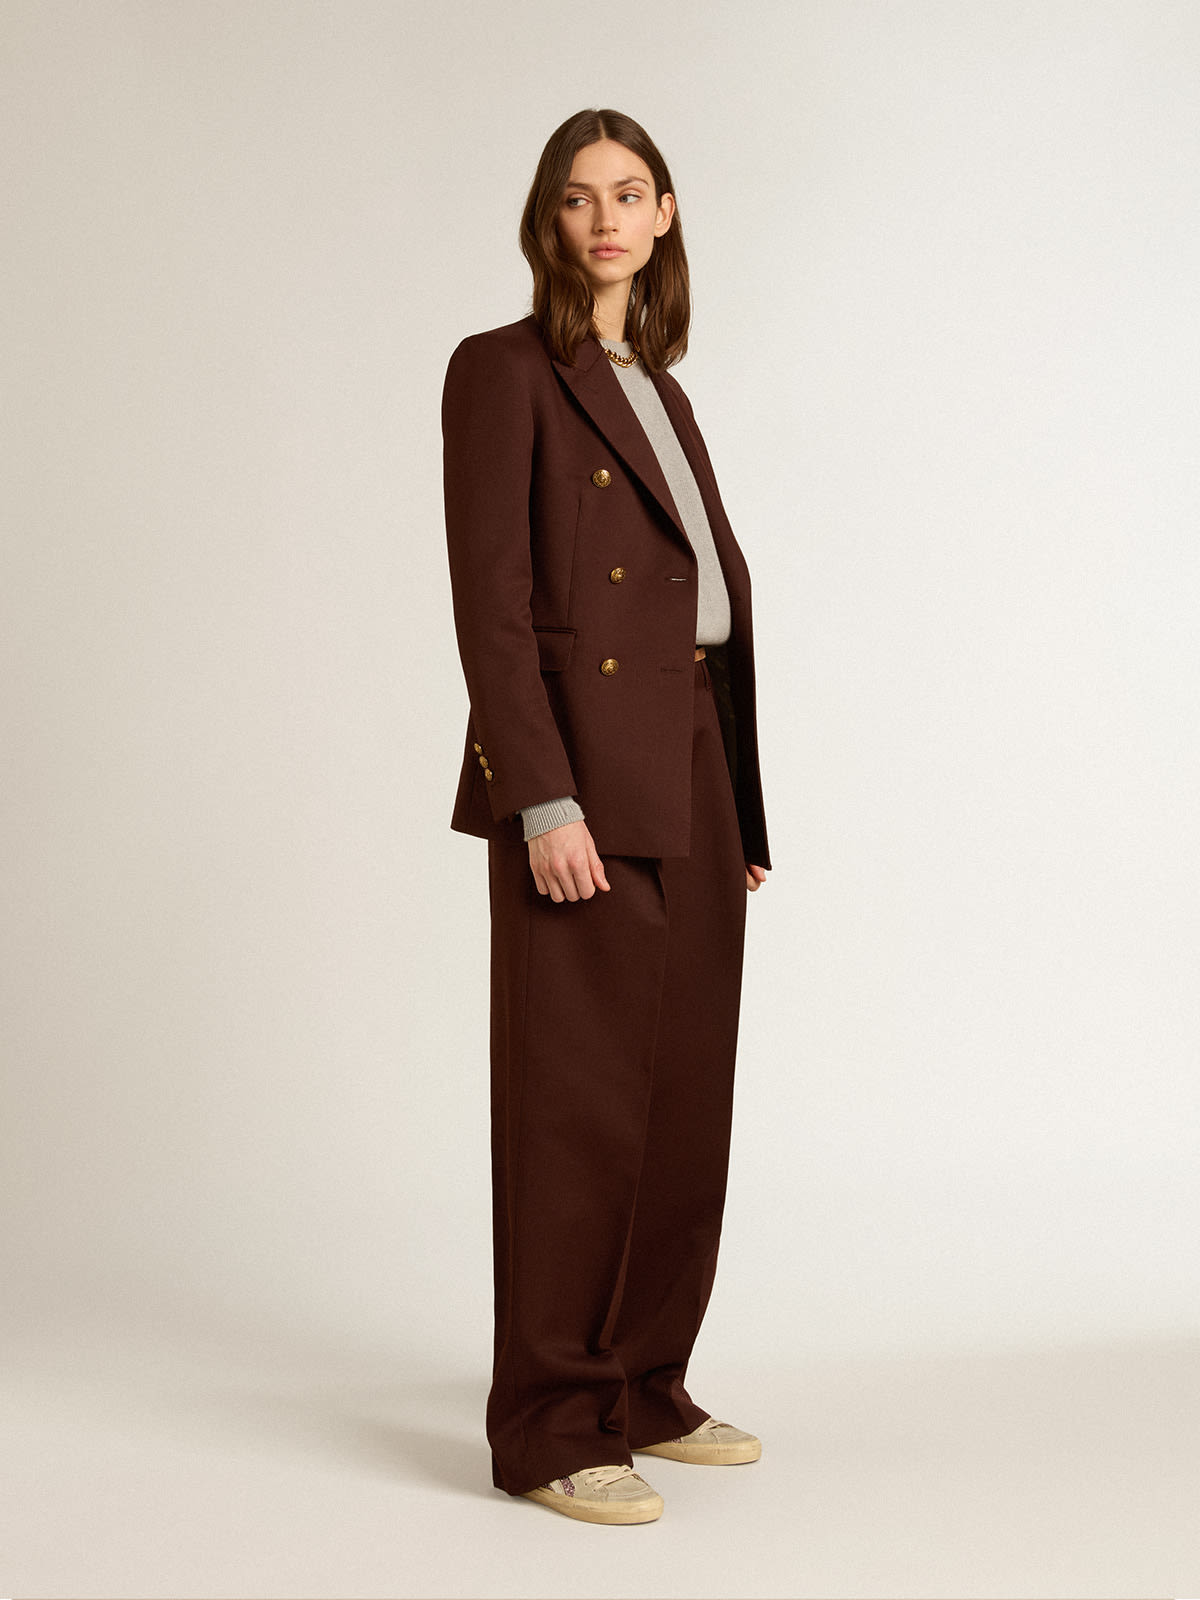 Golden Goose - Journey Collection Flavia pants in chicory-coffee-colored wool gabardine in 